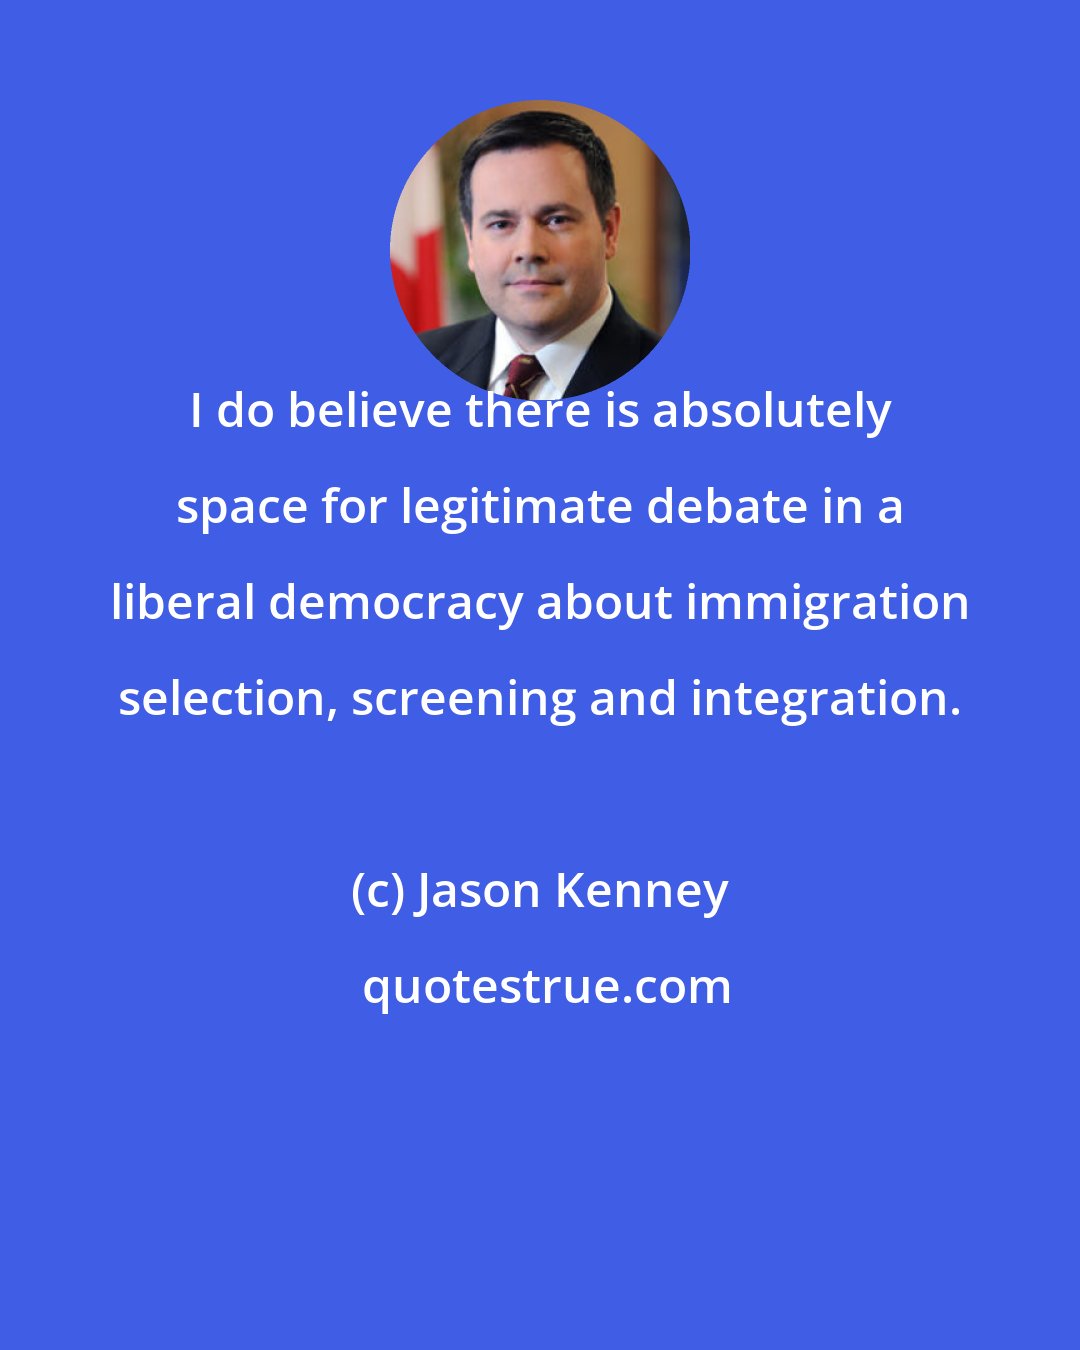 Jason Kenney: I do believe there is absolutely space for legitimate debate in a liberal democracy about immigration selection, screening and integration.